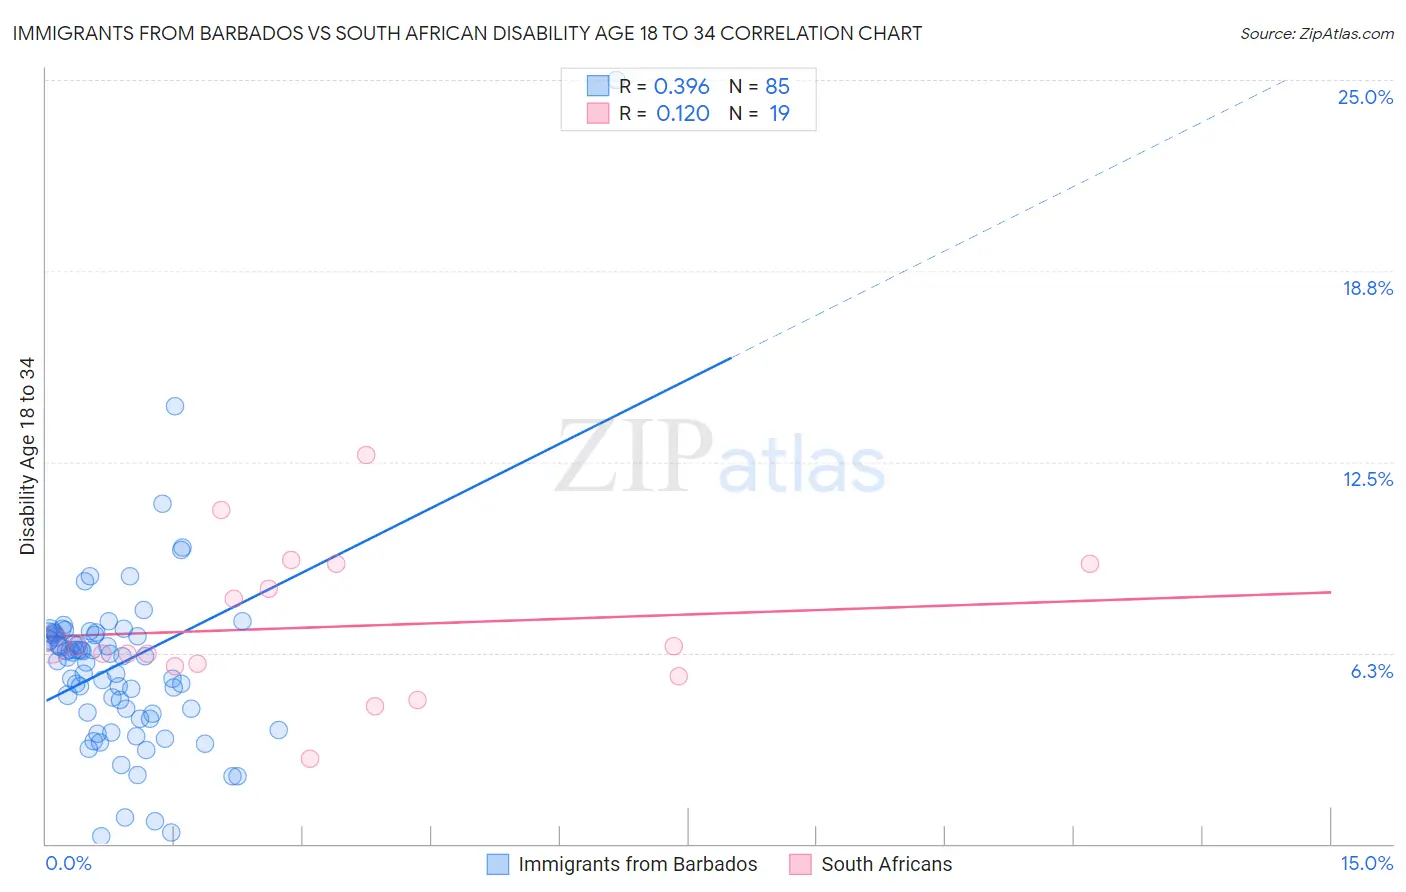 Immigrants from Barbados vs South African Disability Age 18 to 34